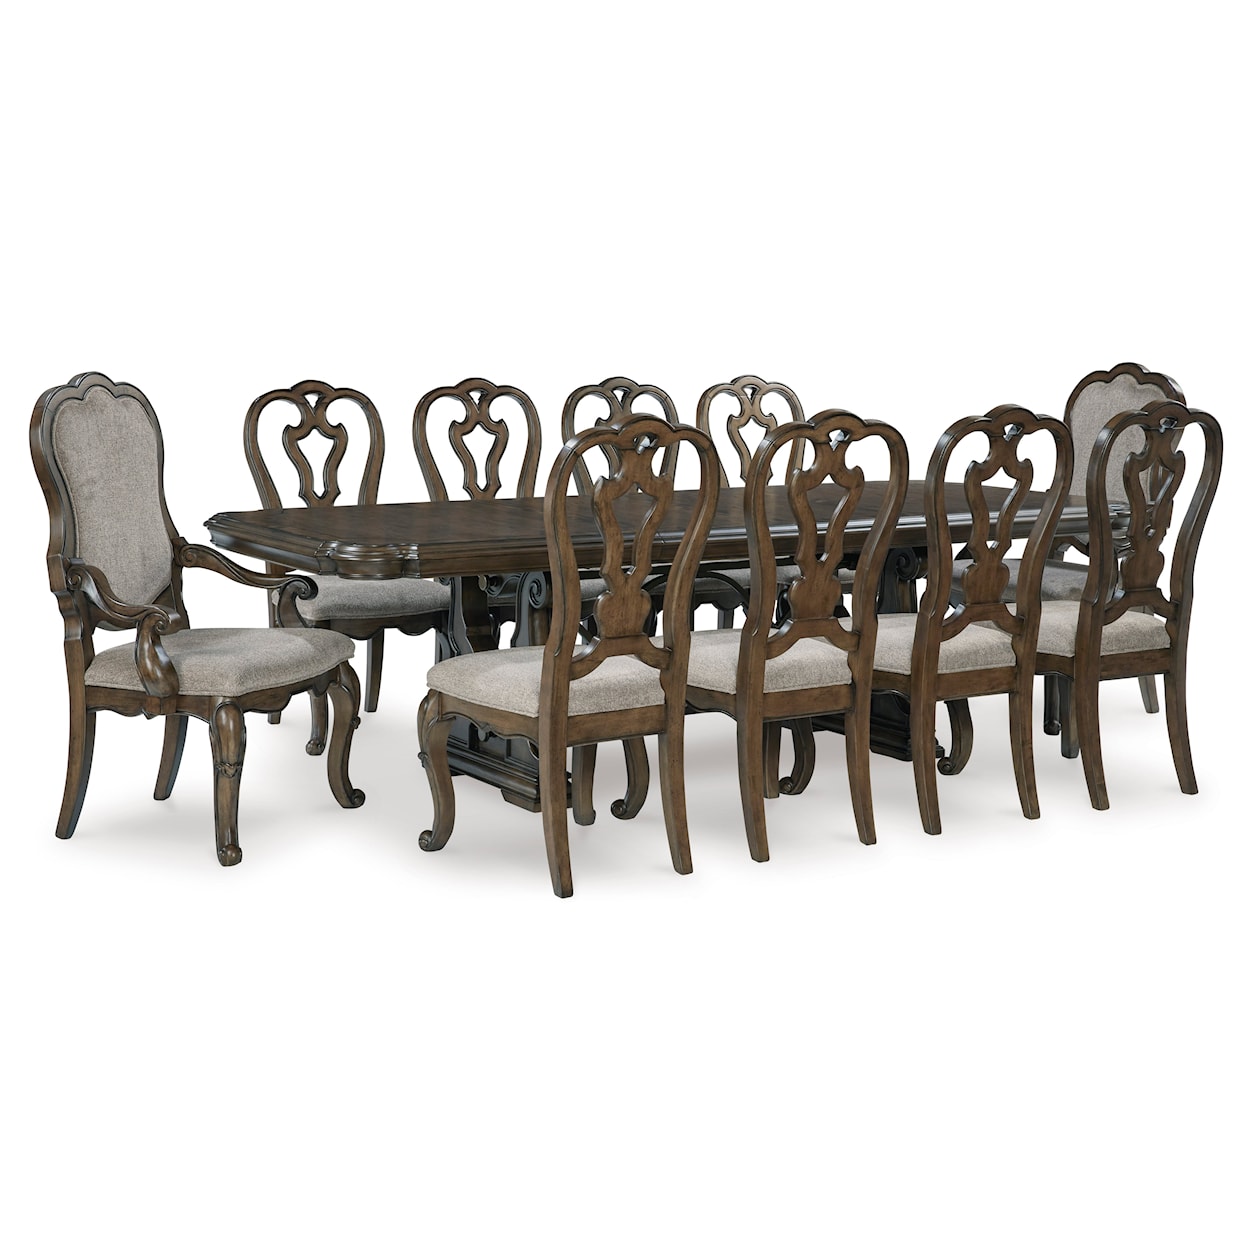 Signature Design by Ashley Maylee 11-Piece Dining Set